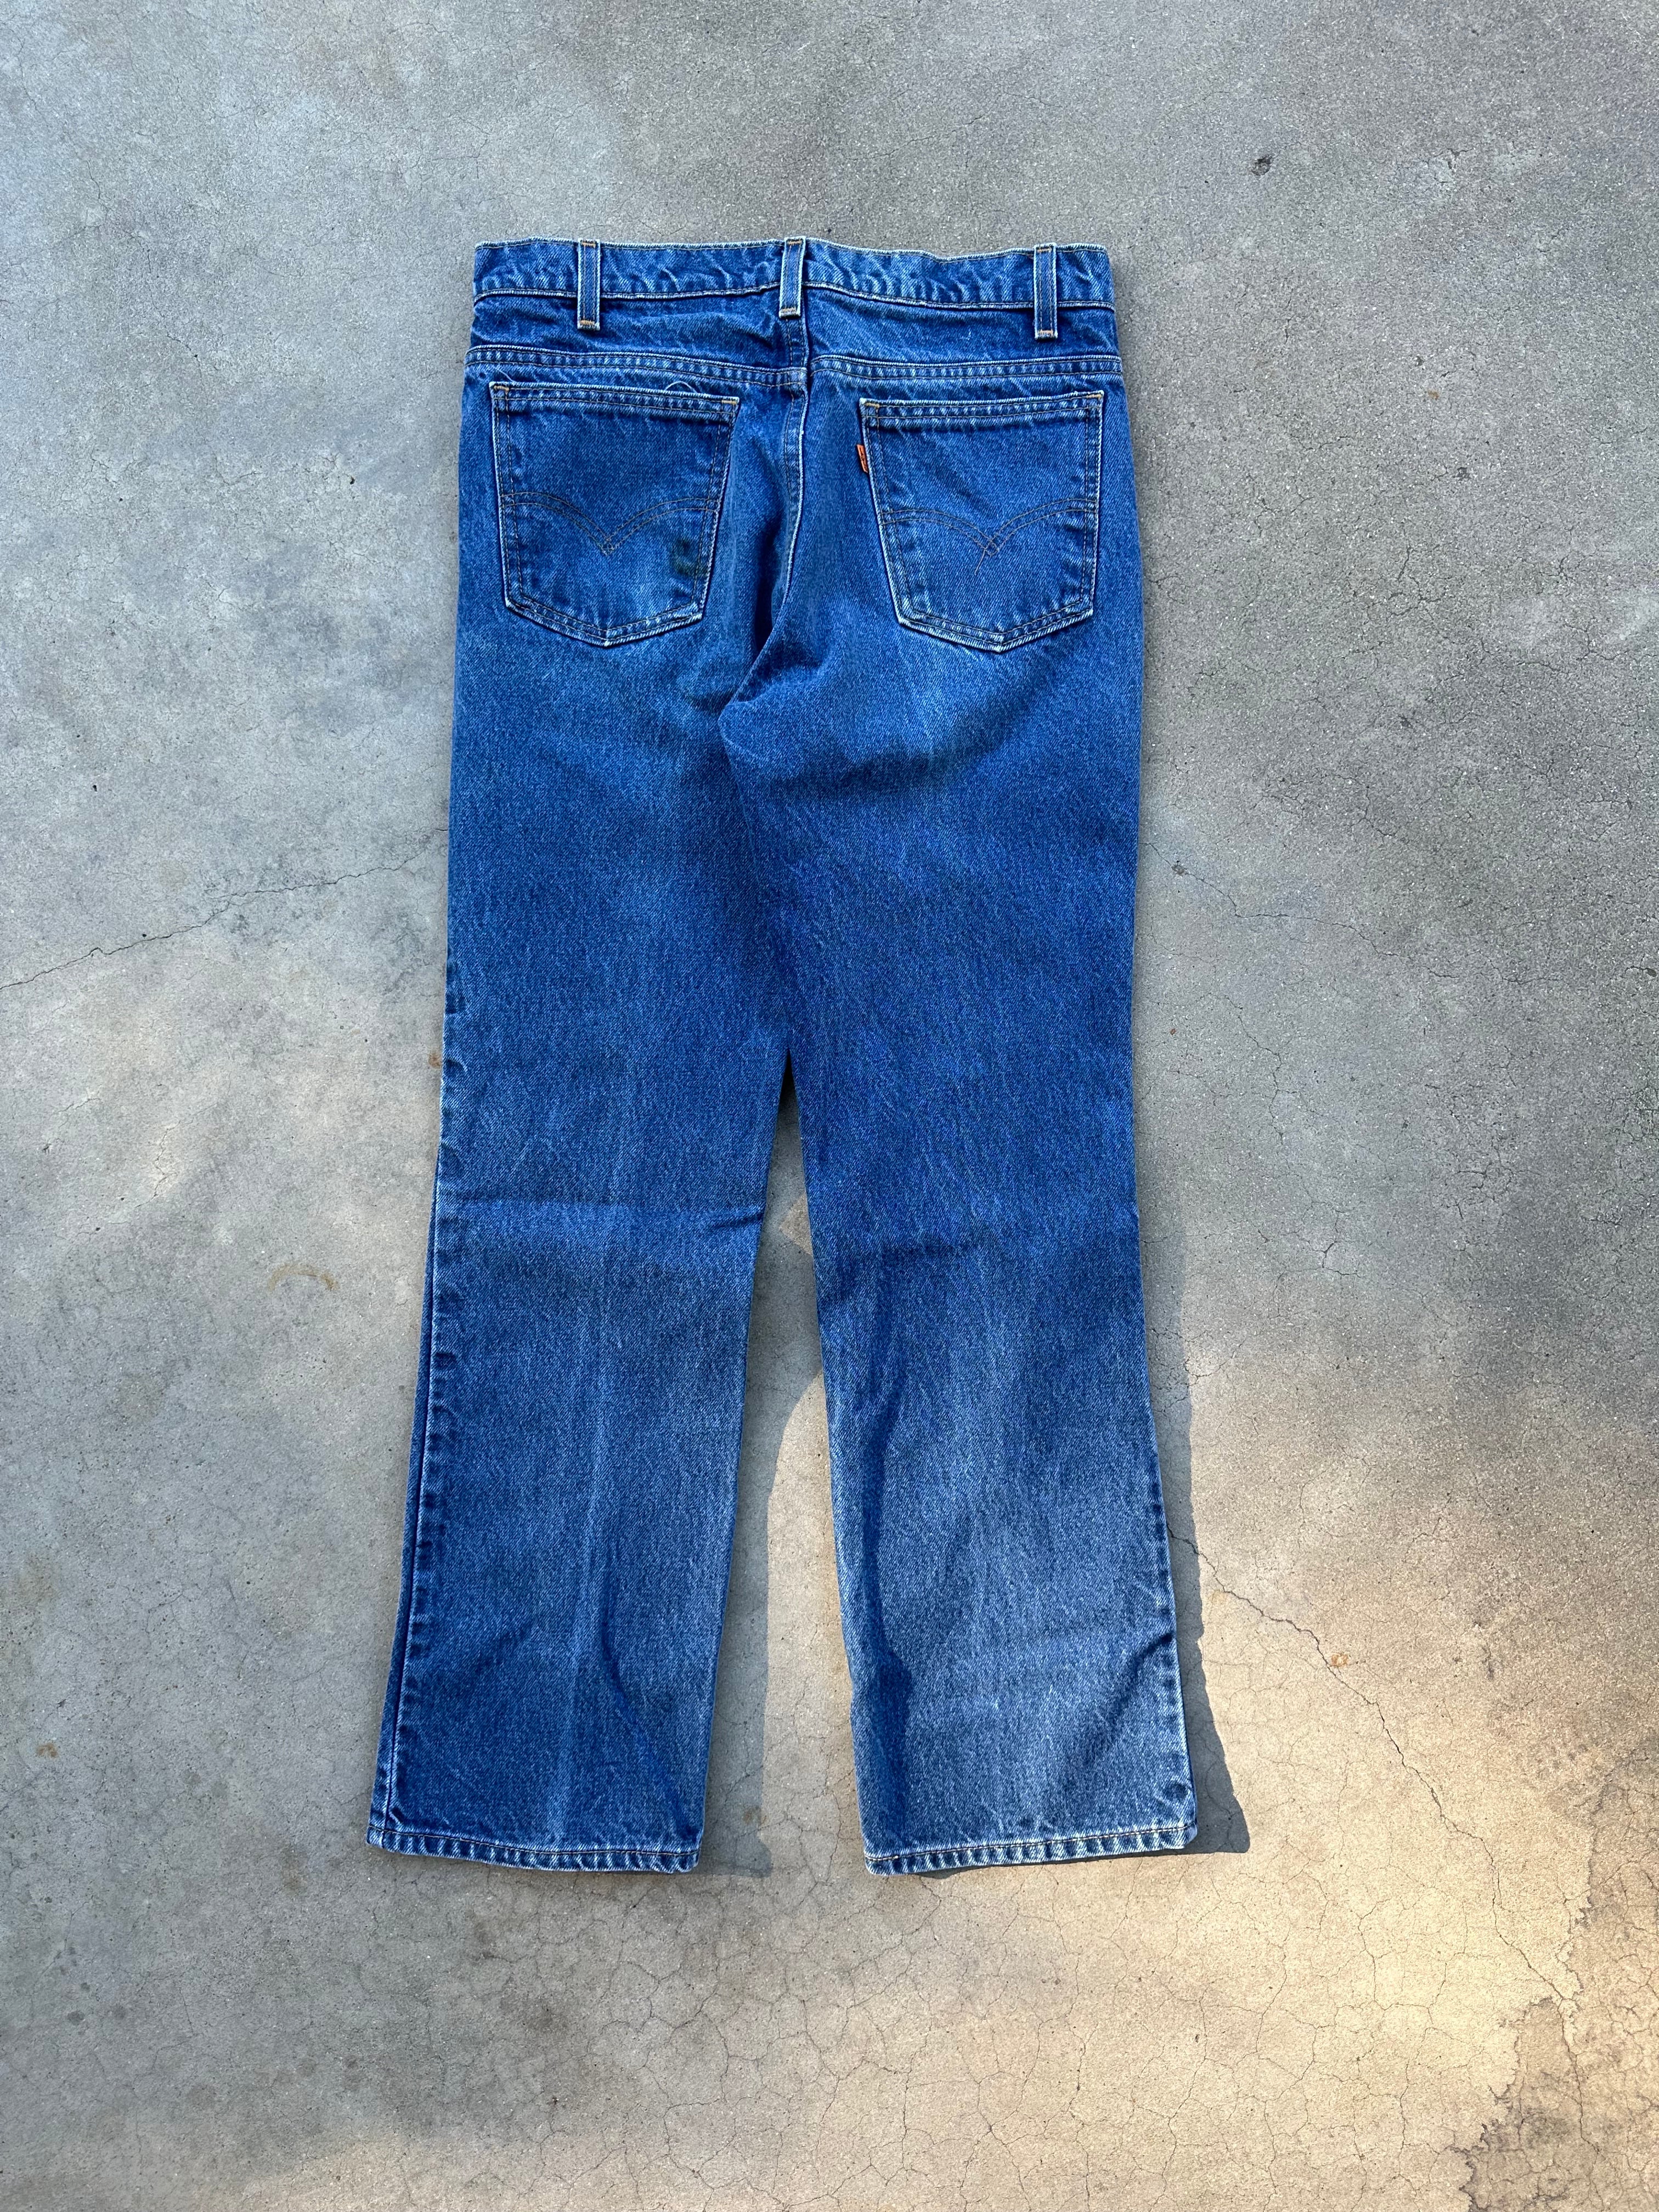 1996 Levi’s 517 Flare Jeans (30"x29")